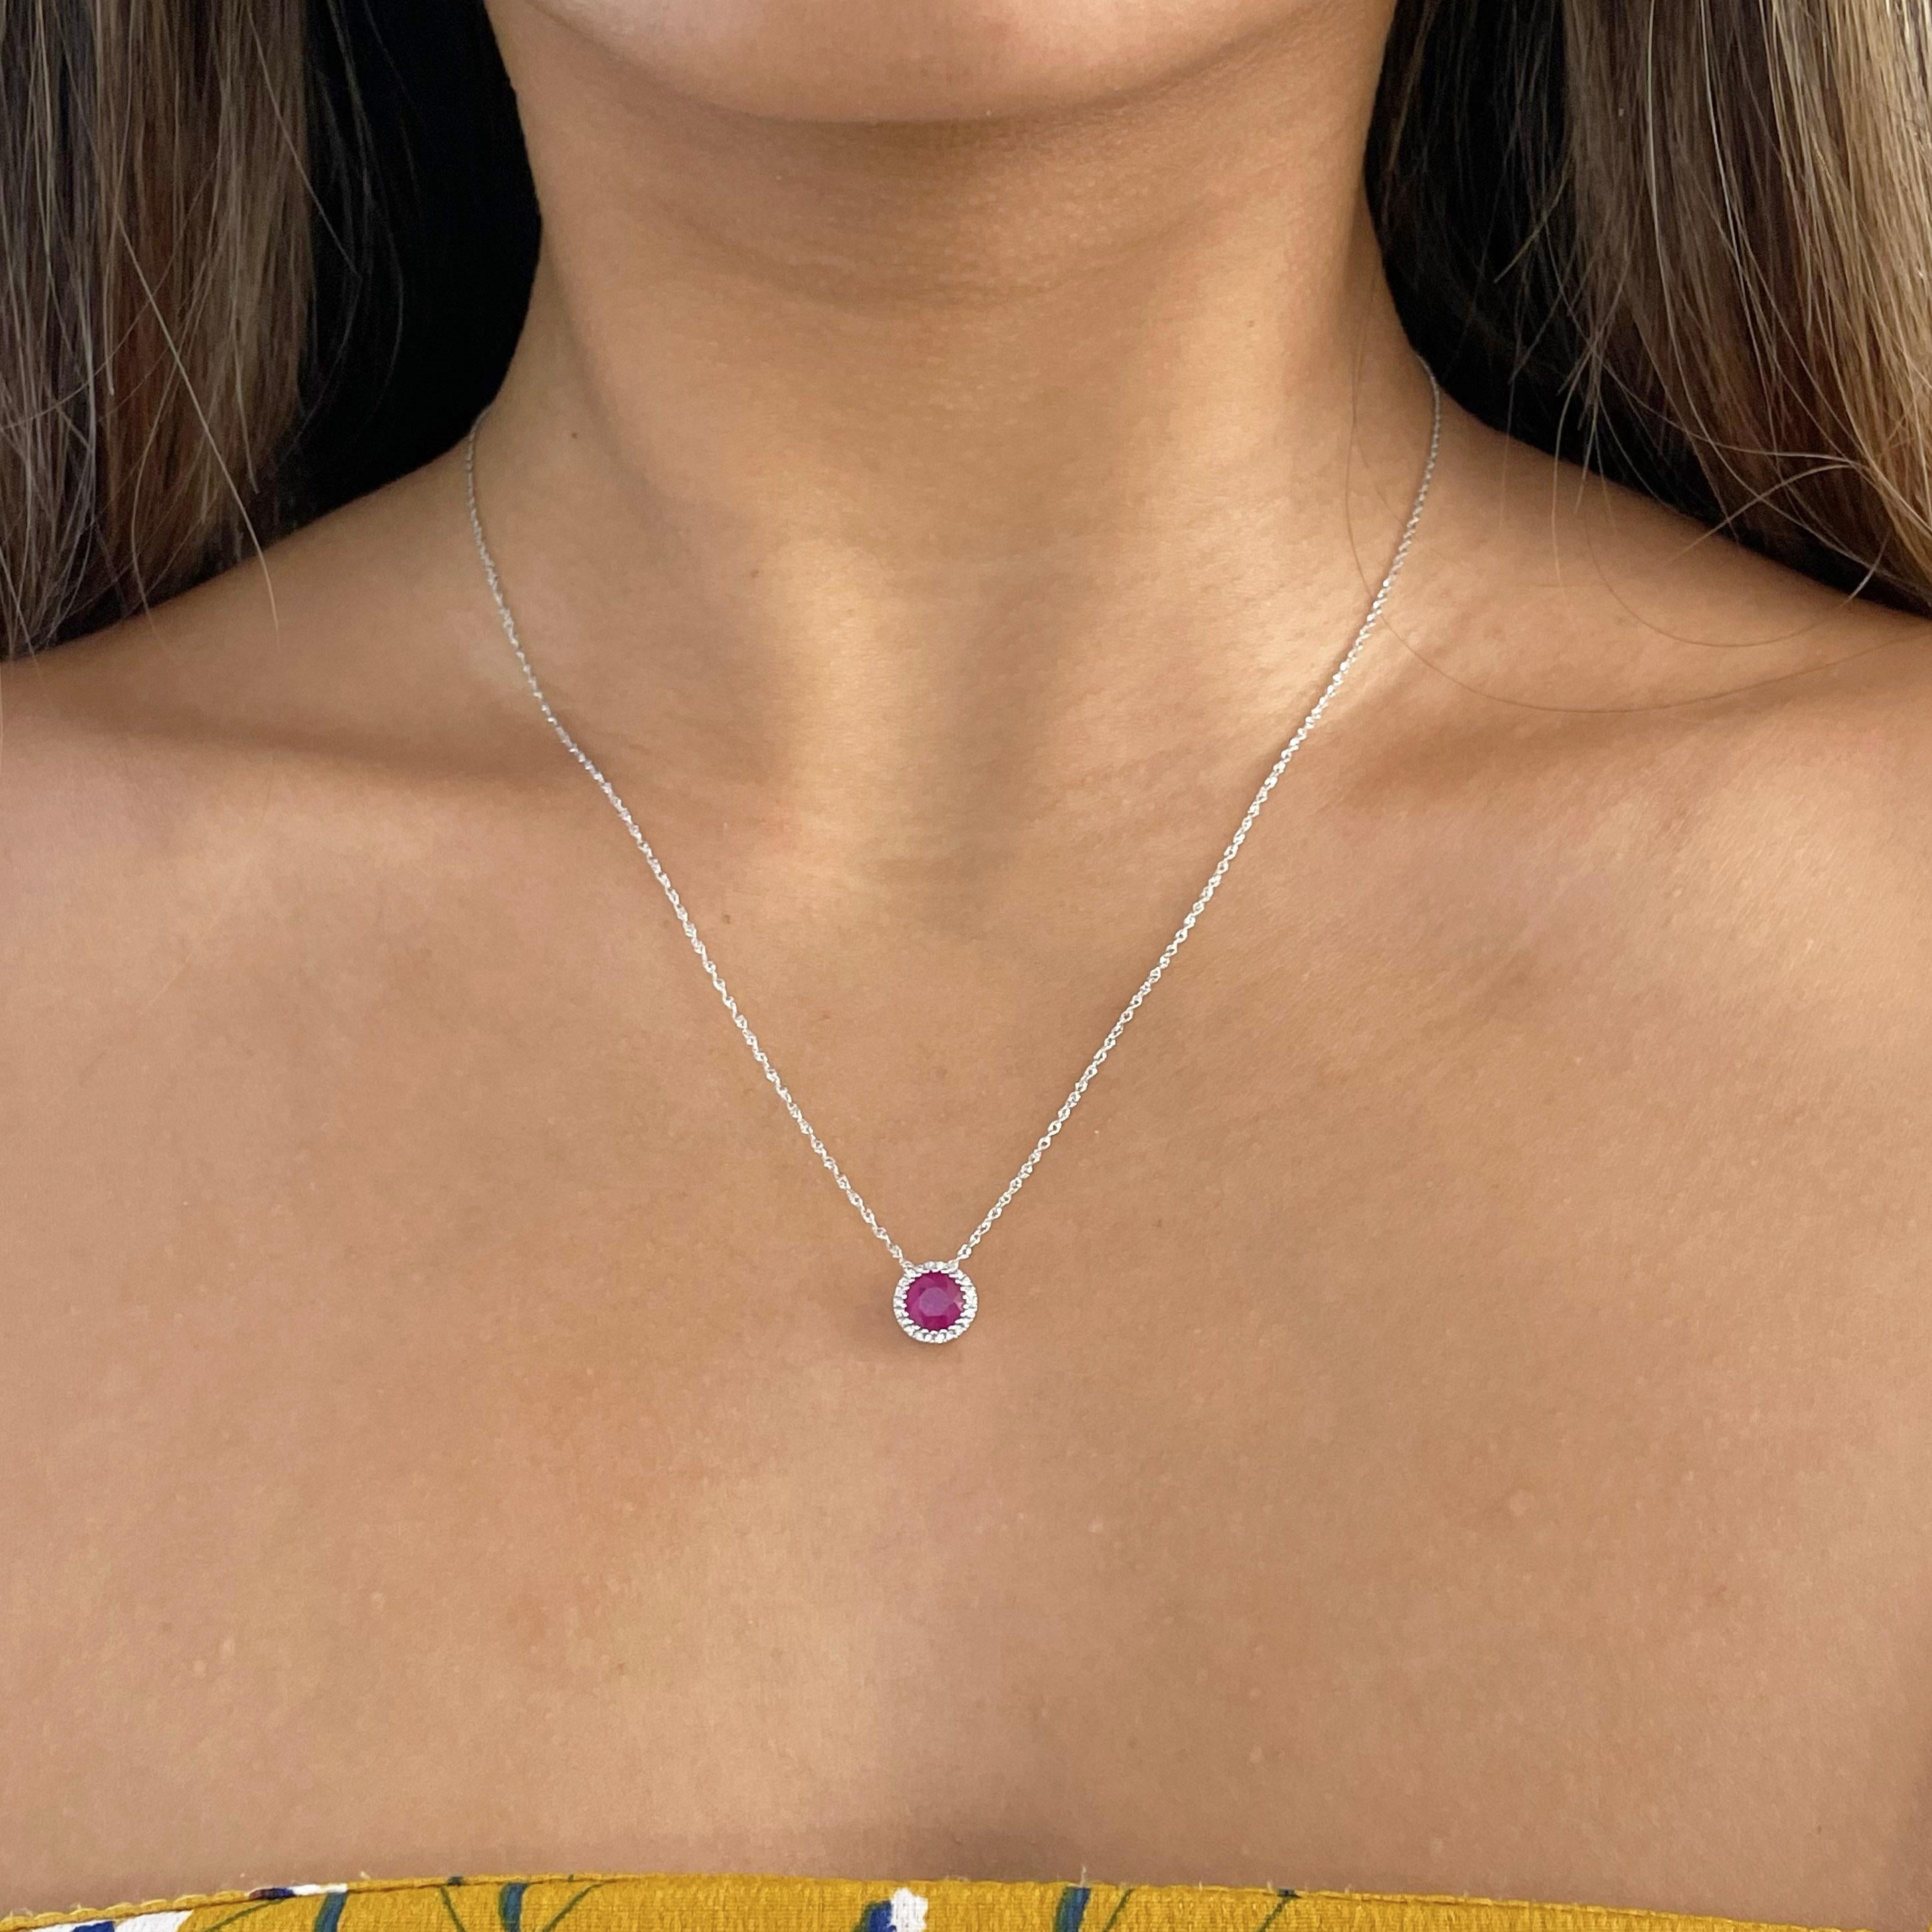 The diamond halo on this necklace contrasts beautifully with the vibrant ruby in the center. It's perfectly stunning on its own or as part of a neck stack. The details for this beautiful necklace are listed below:
Metal Quality: 14K White